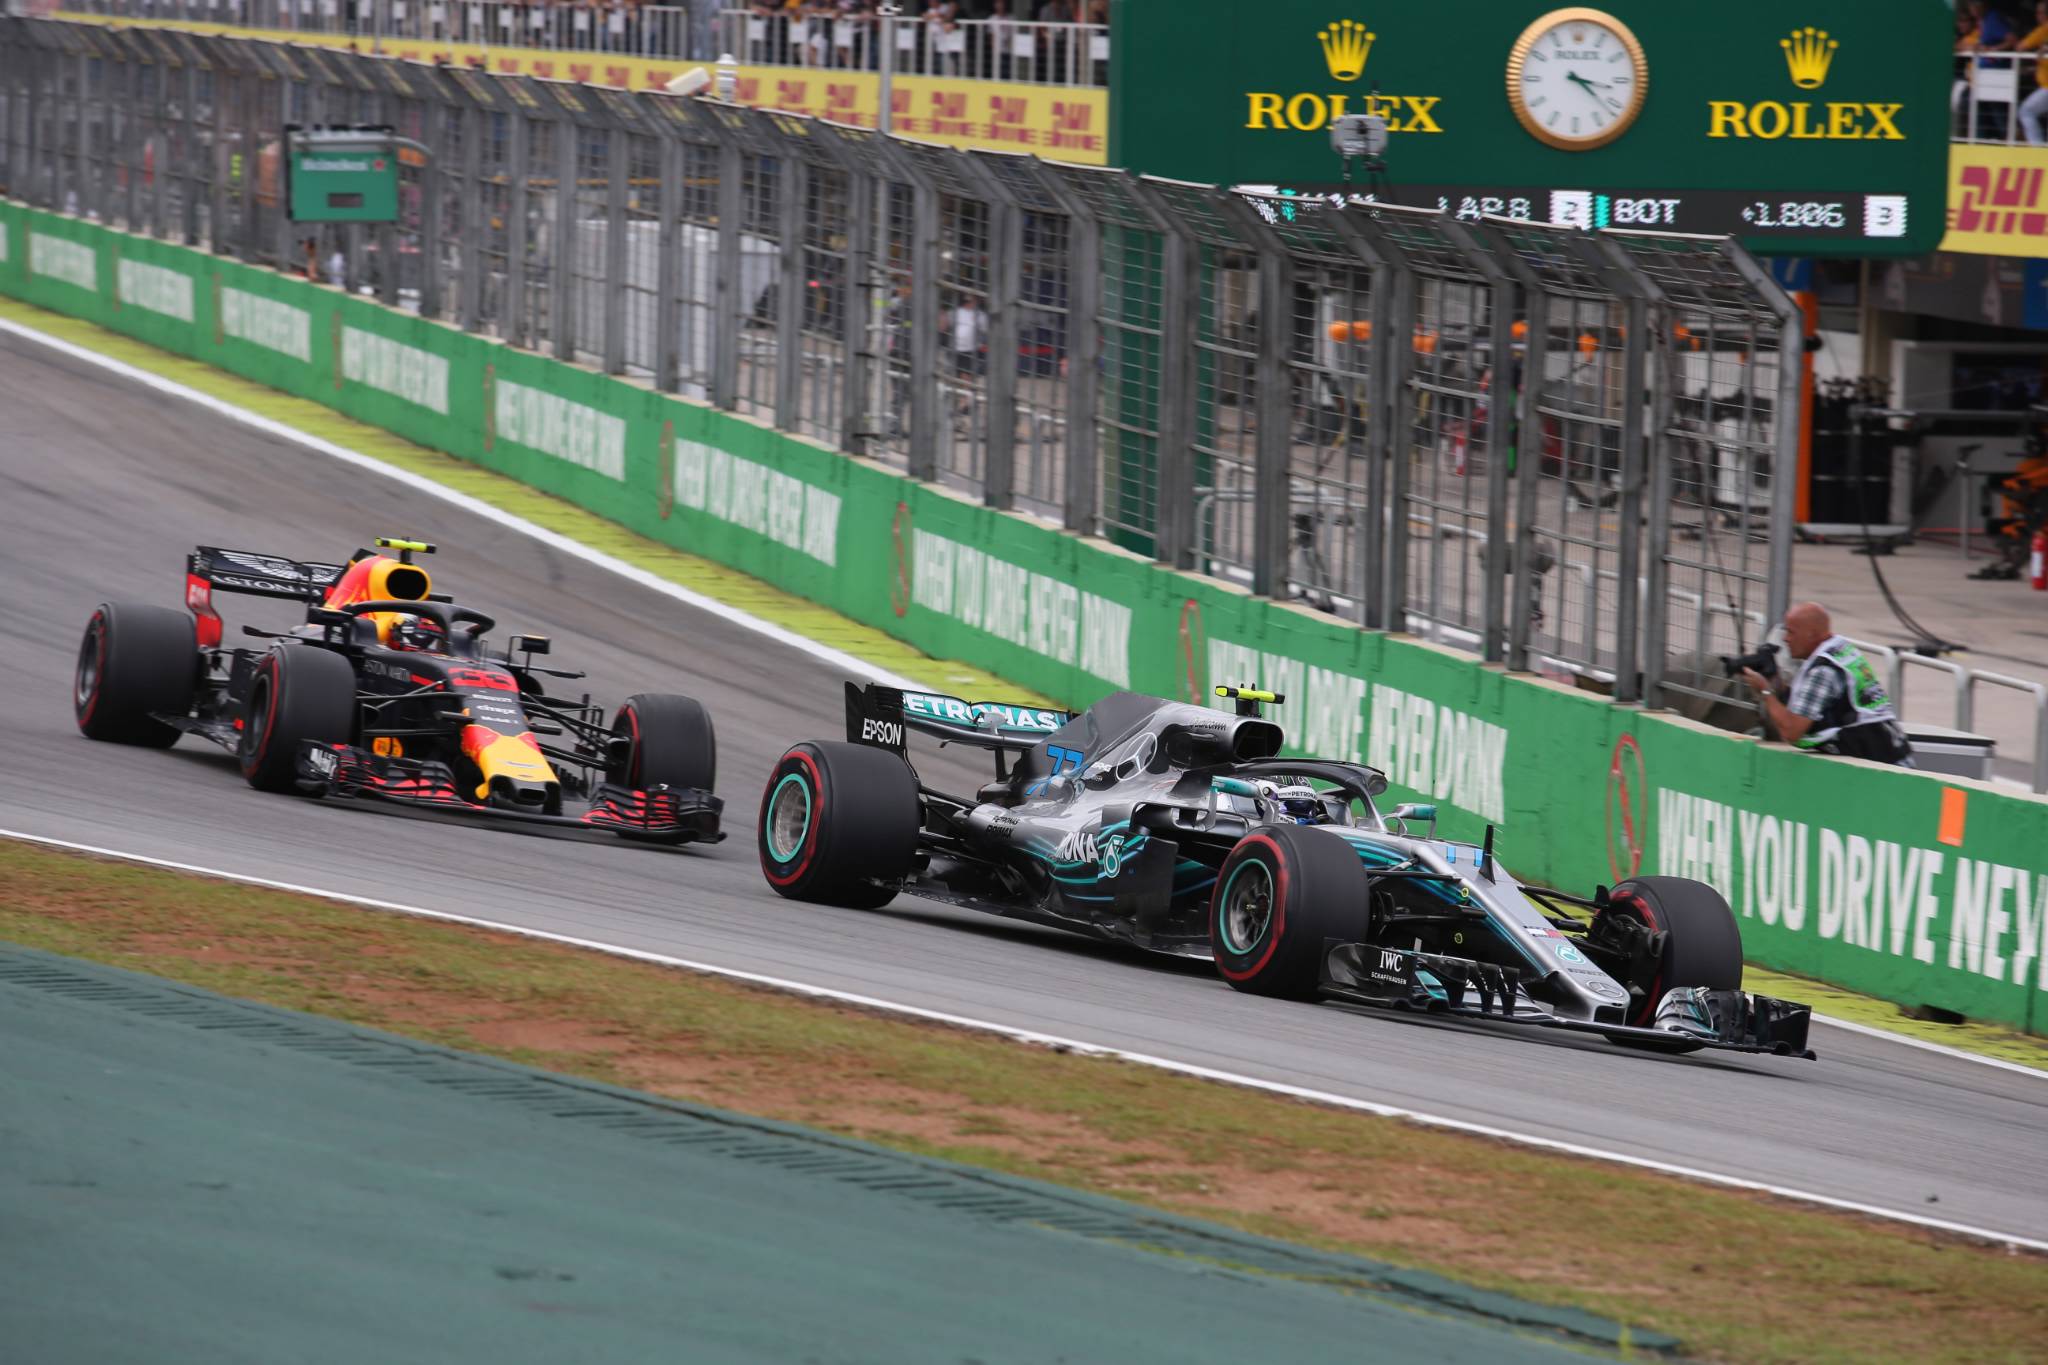 11.11.2018 - Race, Max Verstappen (NED) Red Bull Racing RB14 and Valtteri Bottas (FIN) Mercedes AMG F1 W09 